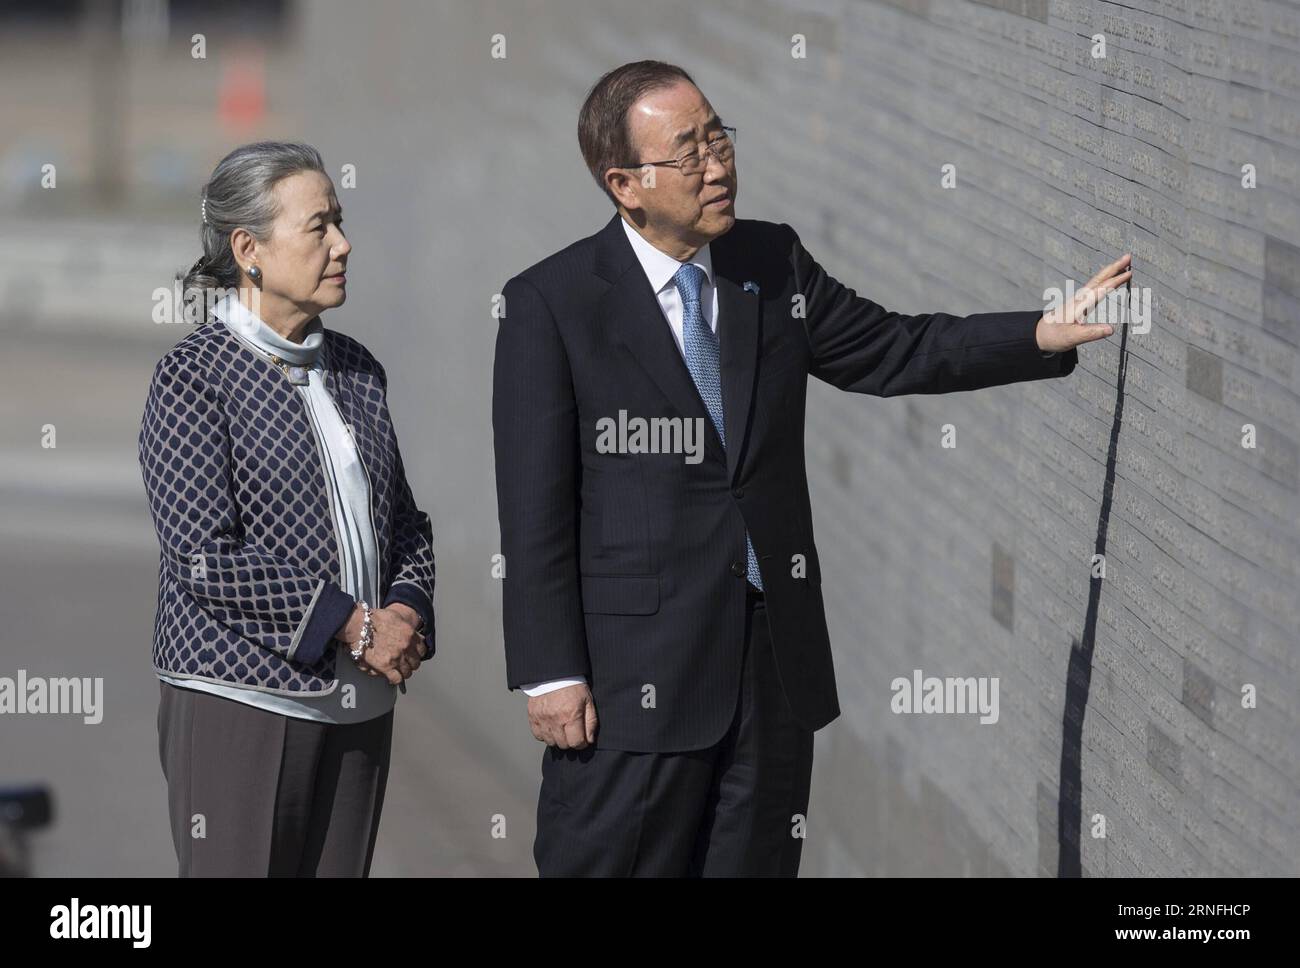 (160810) -- BUENOS AIRES, Aug. 10, 2016 -- United Nations Secretary-General Ban Ki-moon (R) and his wife Yoo Soon-taek look at the wall inscribed with the names of people missing in the military dictatorship of Argentina (1976-1983), in the Park of the Memory in Buenos Aires Aug. 9, 2016. Martin Zabala) (sxk) ARGENTINA-BUENOS AIRES-UN CHIEF-VISIT e MARTINxZABALA PUBLICATIONxNOTxINxCHN   160810 Buenos Aires Aug 10 2016 United Nations Secretary General Ban KI Moon r and His wife Yoo Soon Taek Look AT The Wall inscribed With The Names of Celebrities Missing in The Military Dictatorship of Argenti Stock Photo